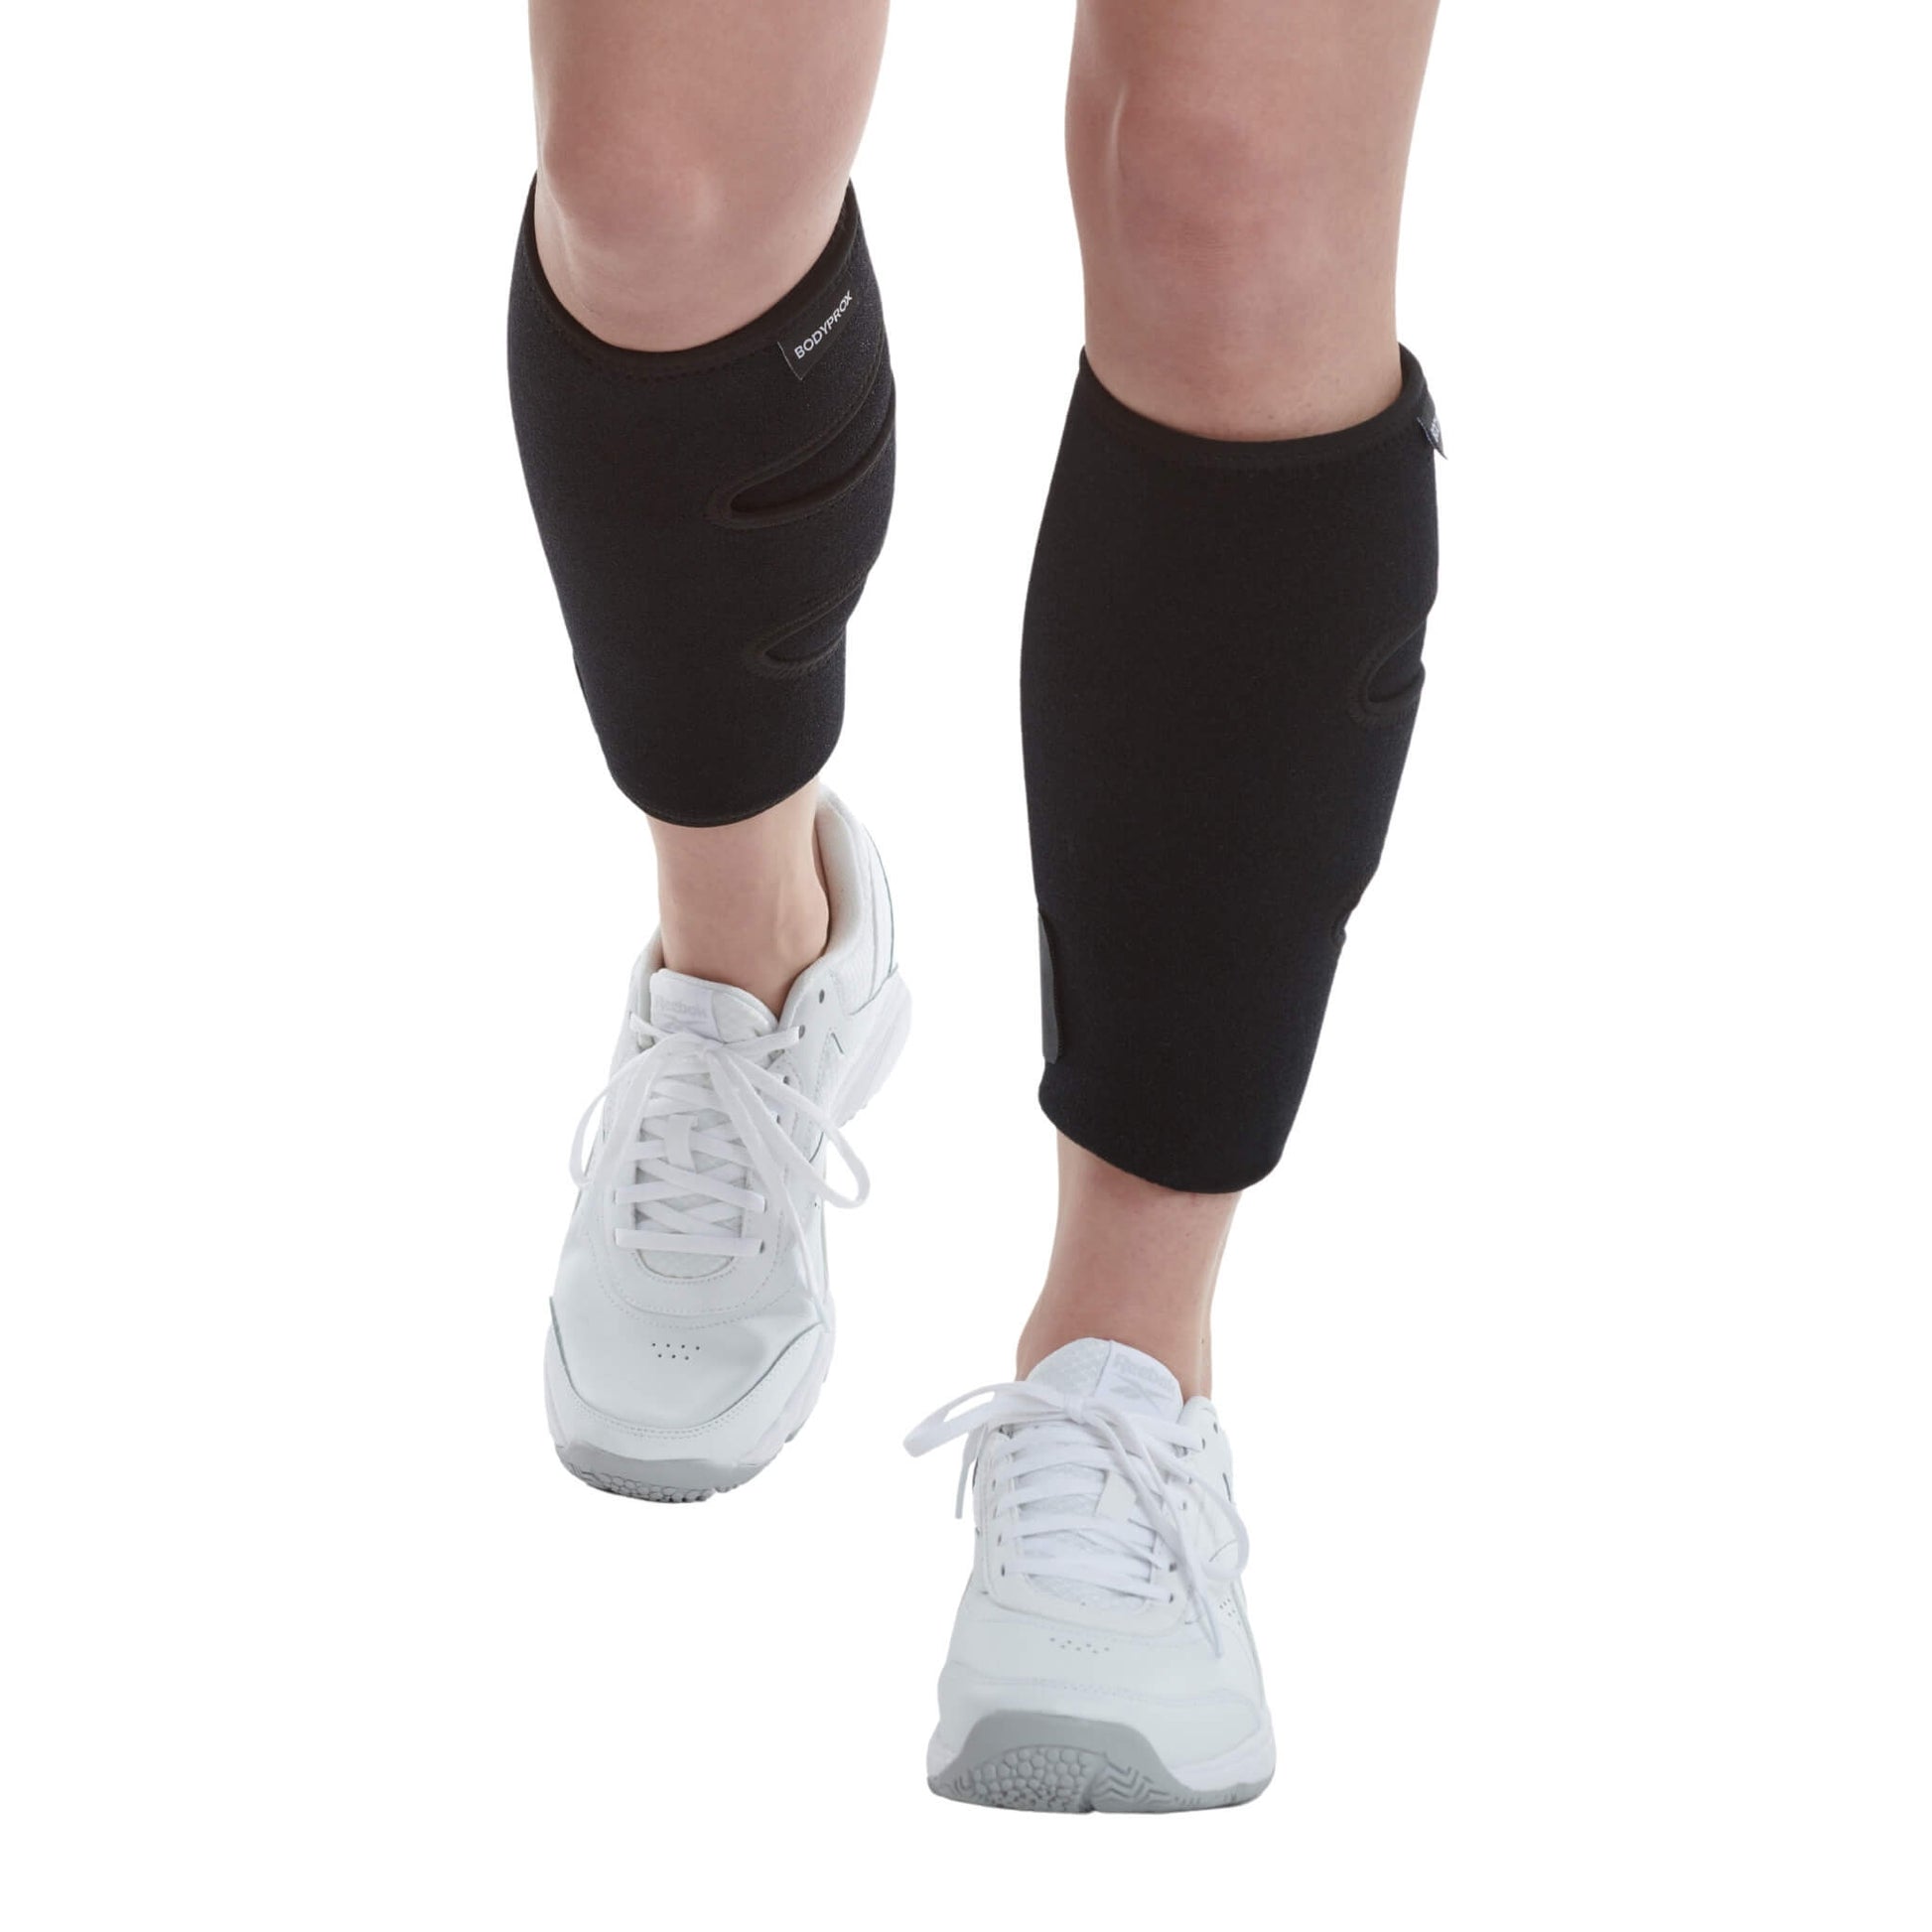 Adjustable Stabilising Neoprene Calf Support, Size: Large at Rs